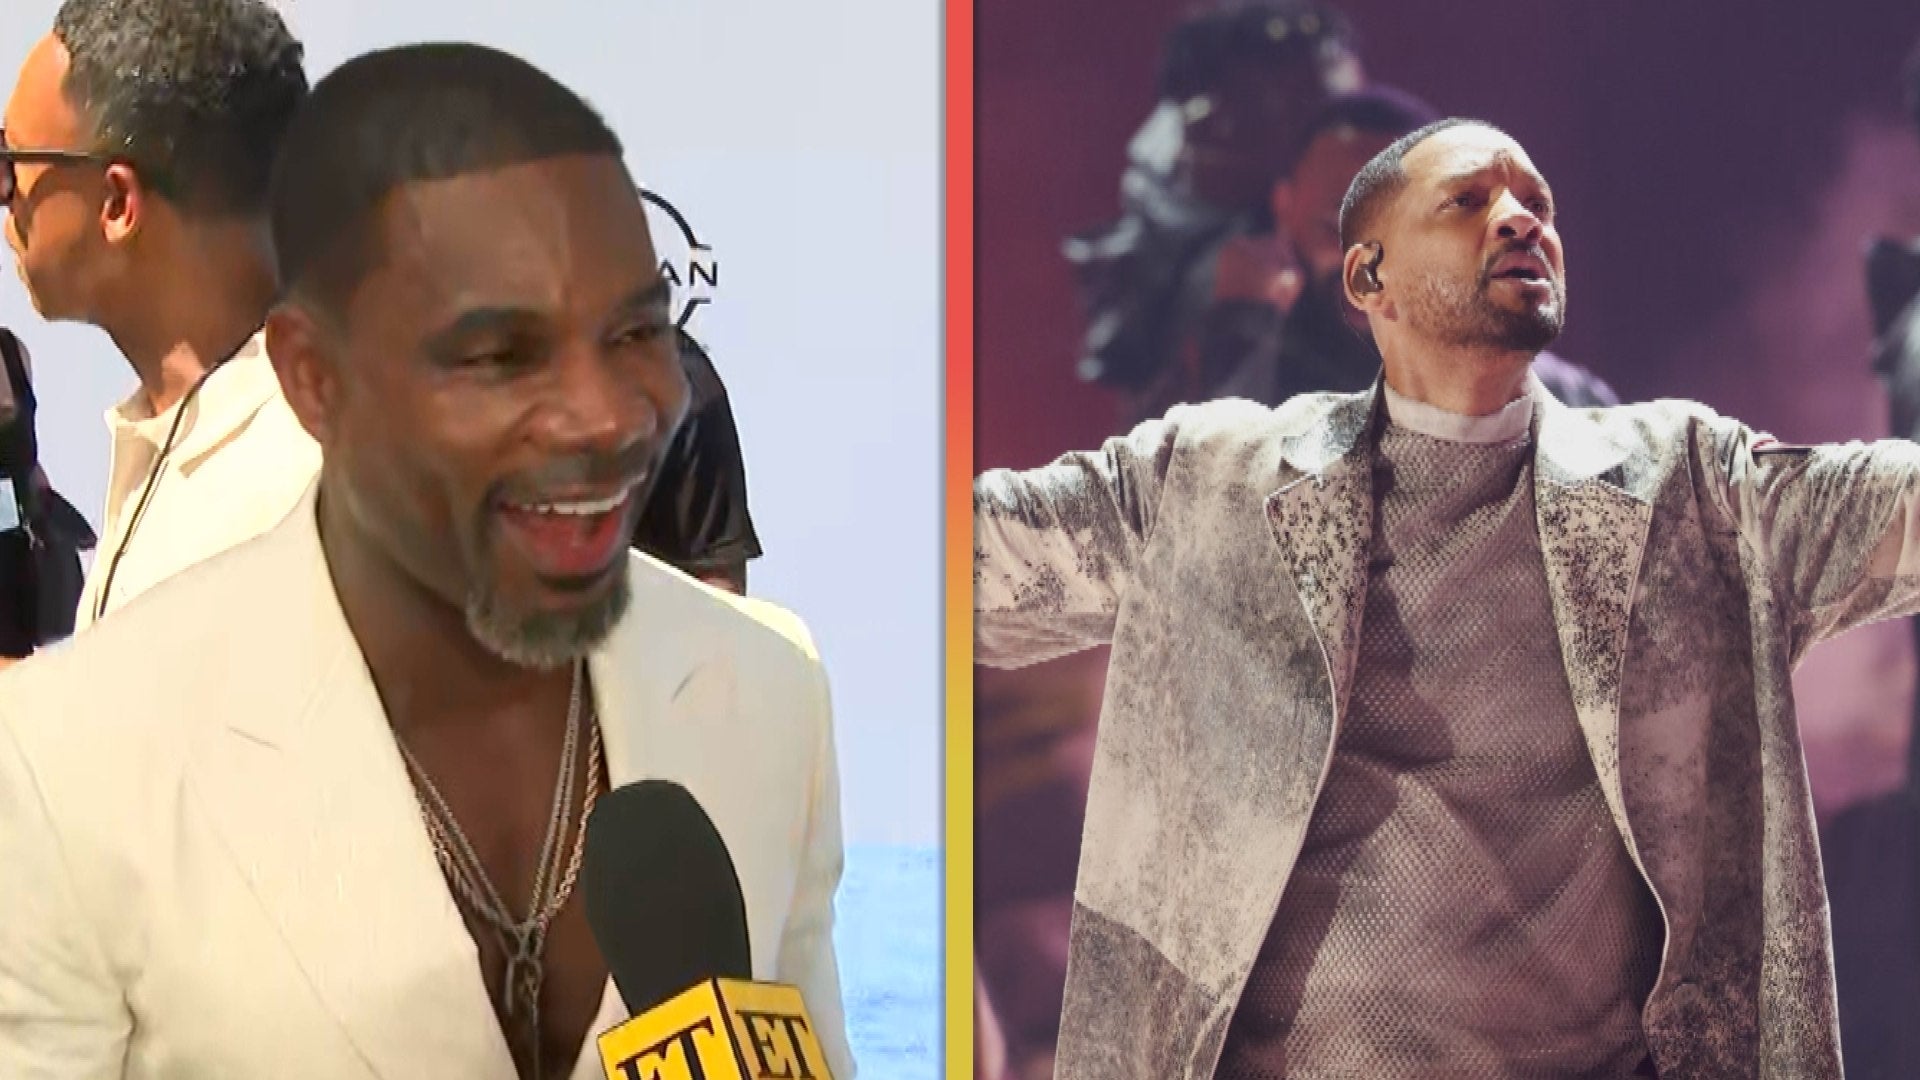 Kirk Franklin Says Will Smith Is Channeling ‘Redemption and Growth’ in Their BET Awards Performance